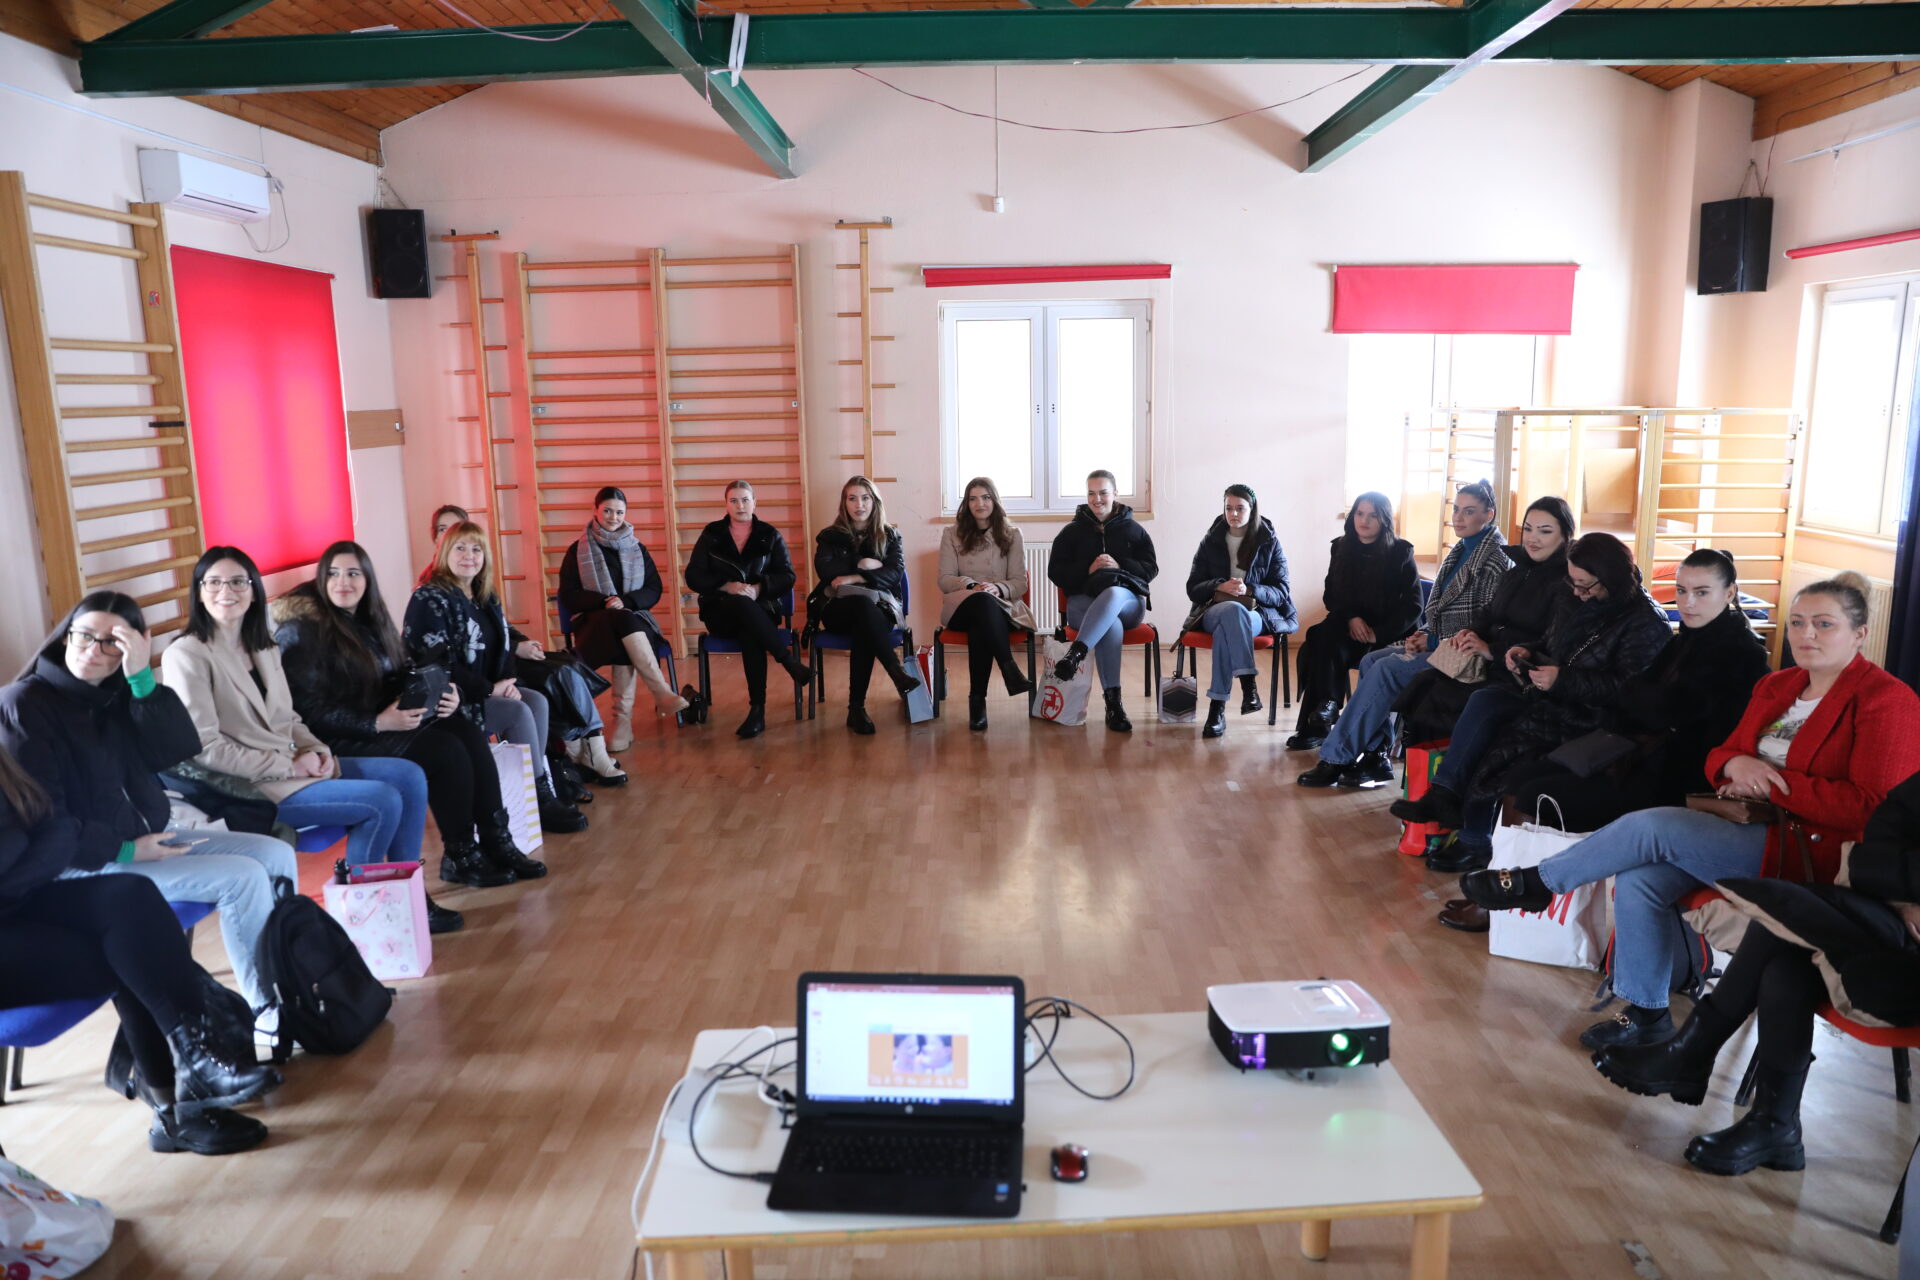 Students of the Faculty of Social Sciences visited SOS Children's Villages